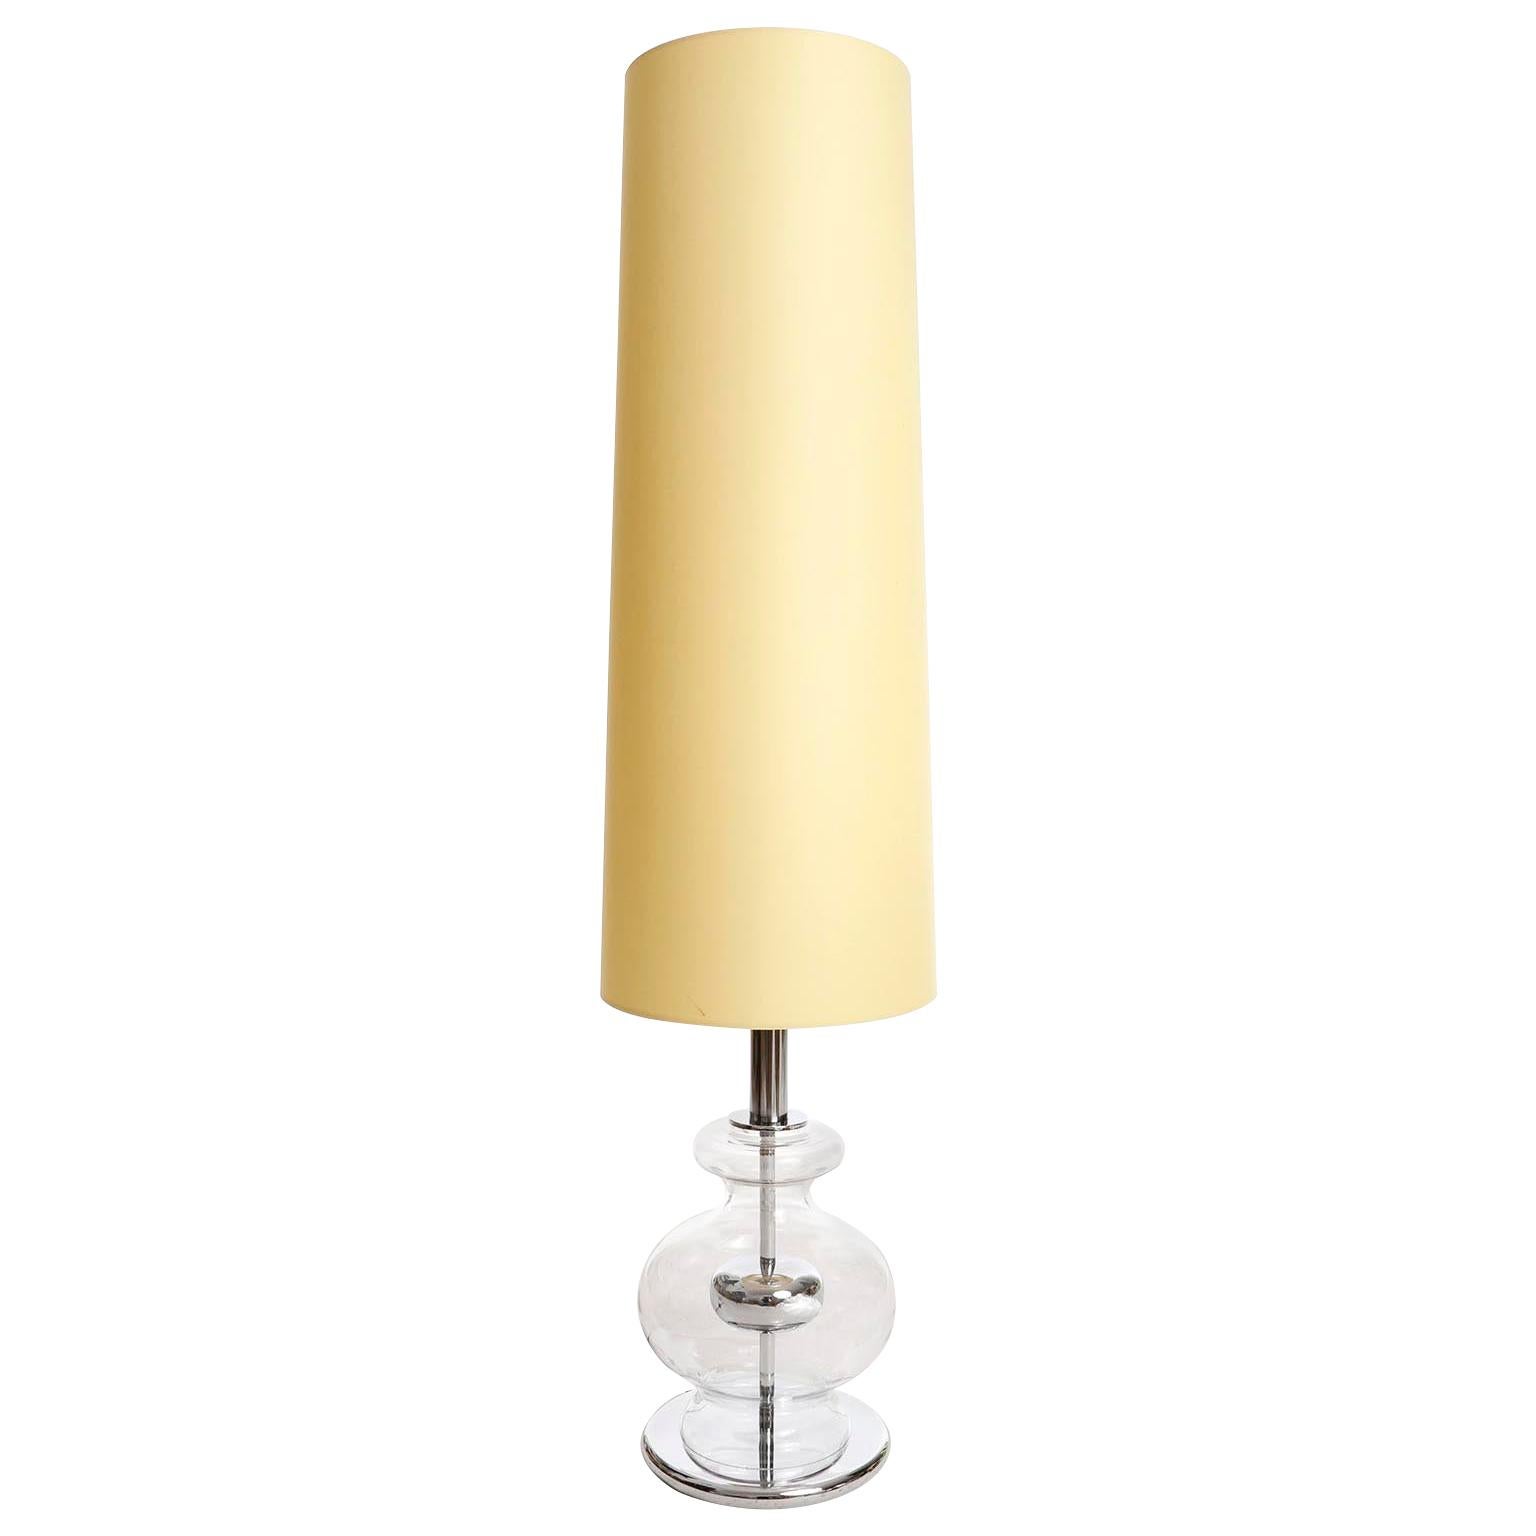 Richard Essig Table Floor Lamp, Glass Chrome Yellow Shade, 1970 For Sale